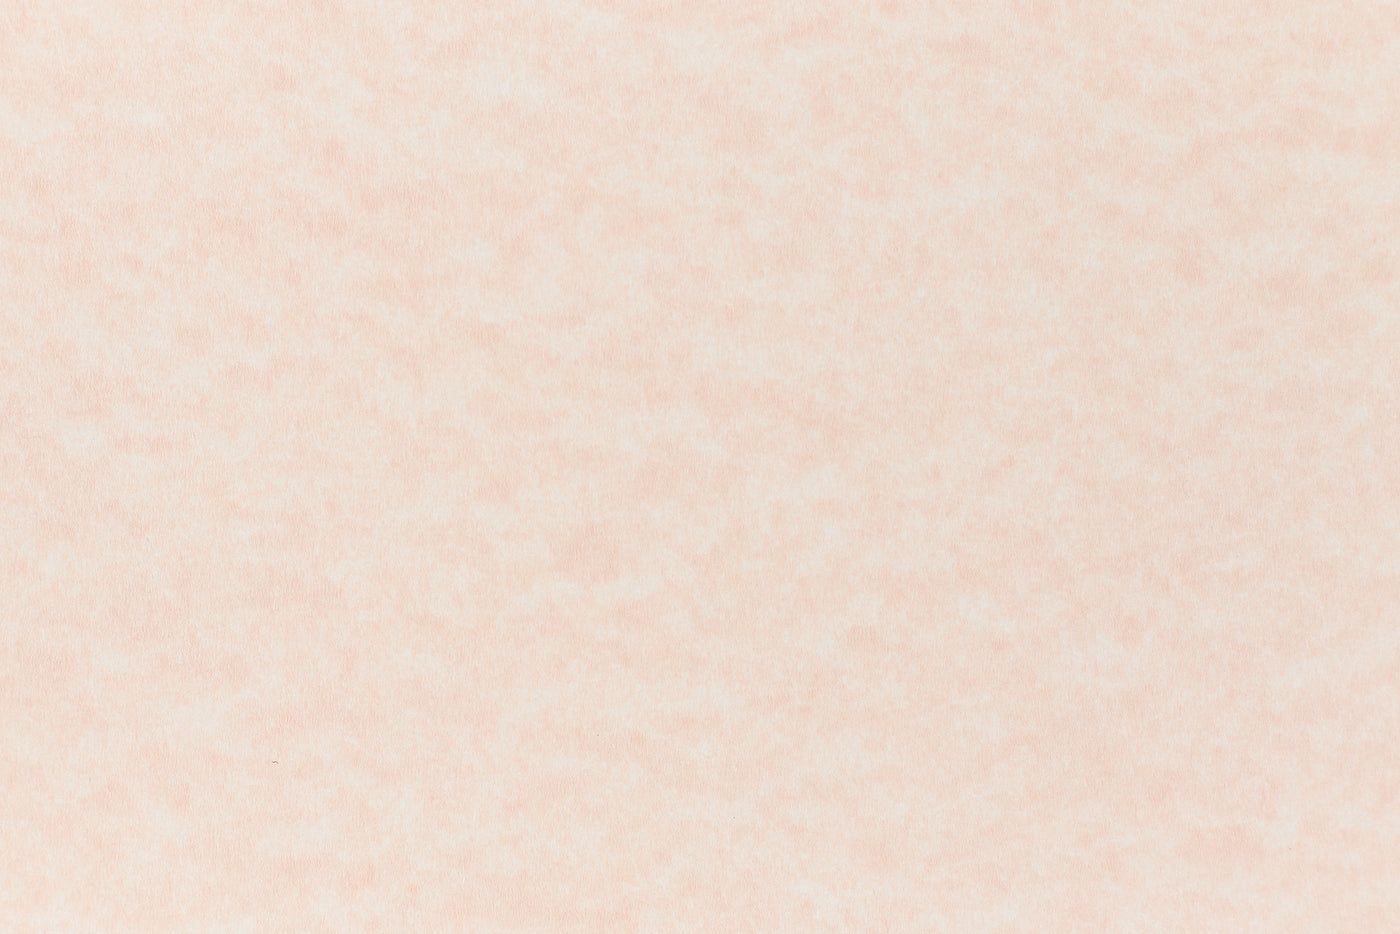 Salmon Paper (Parchtone, Text Weight)